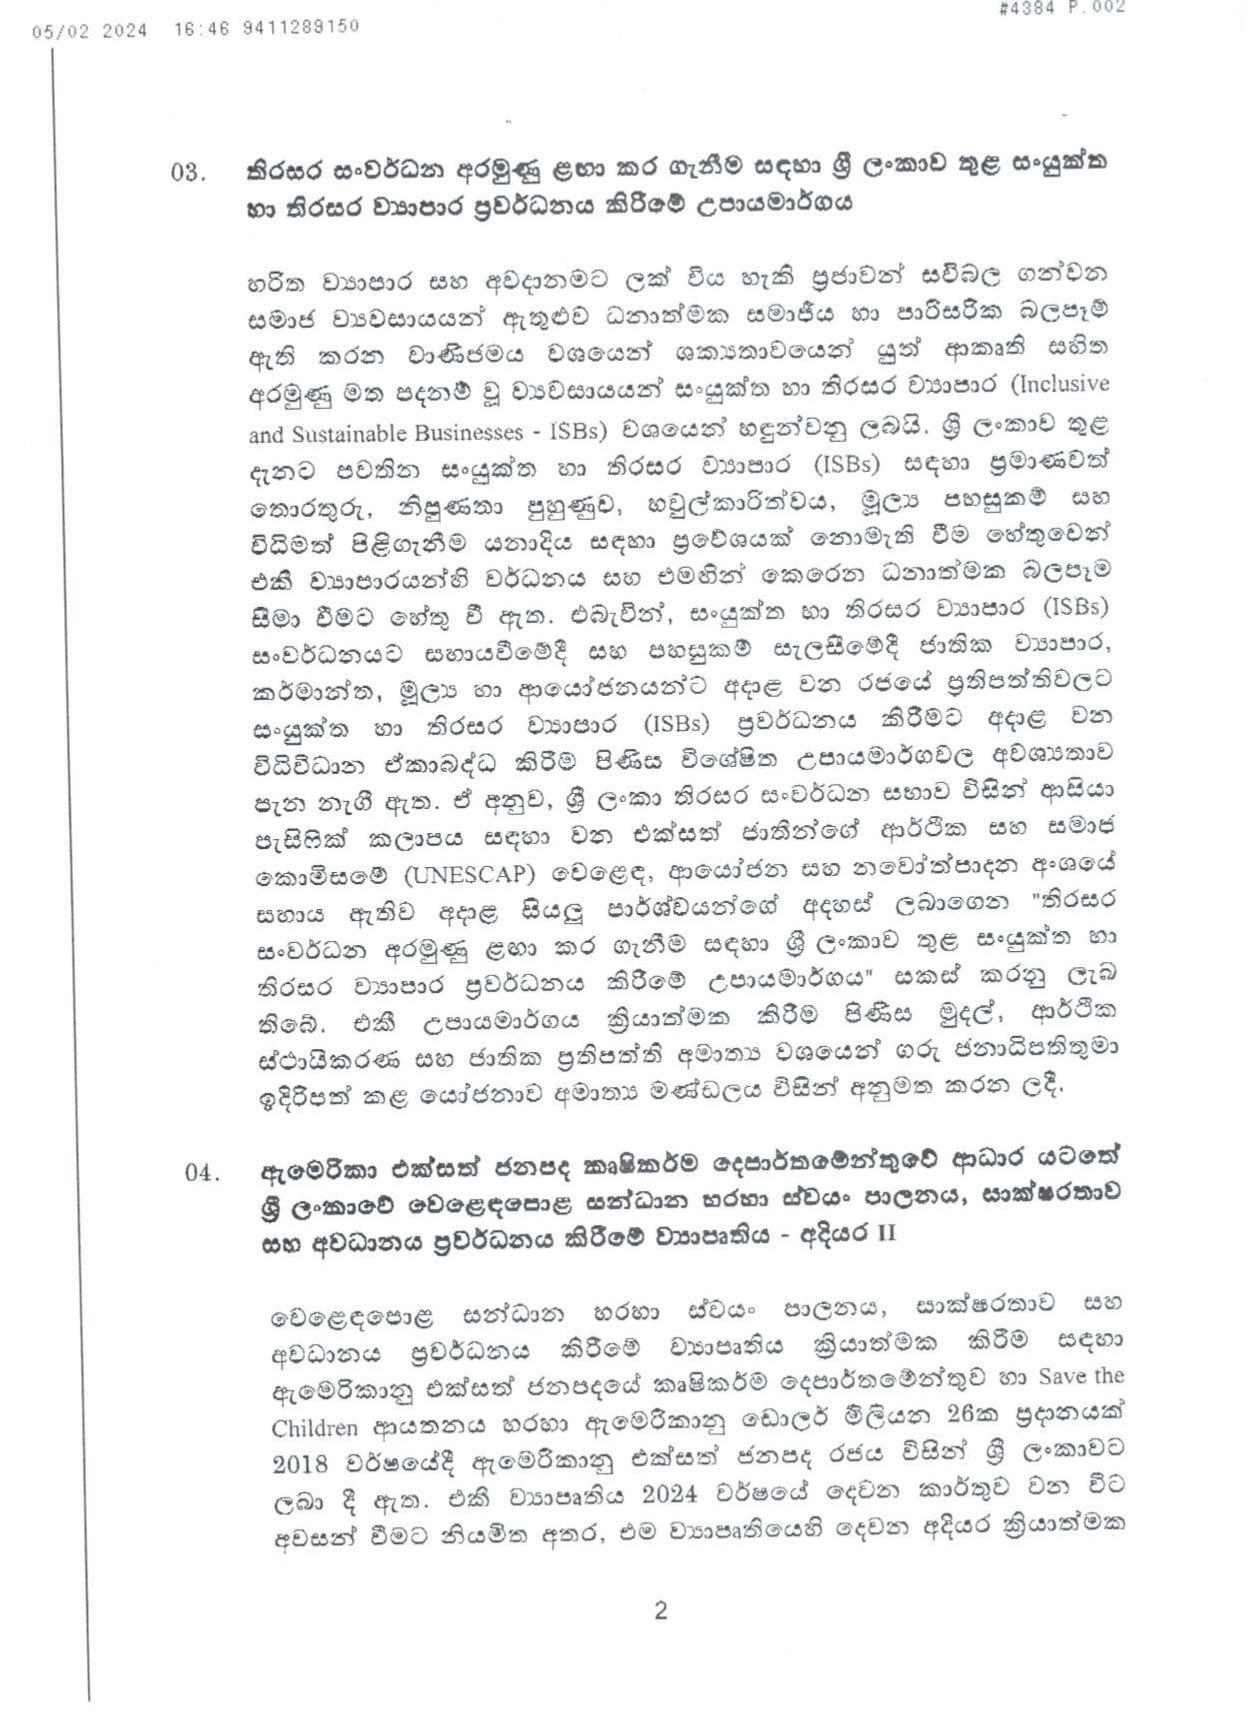 Cabinet Decision on 05.02.2024 page 0002